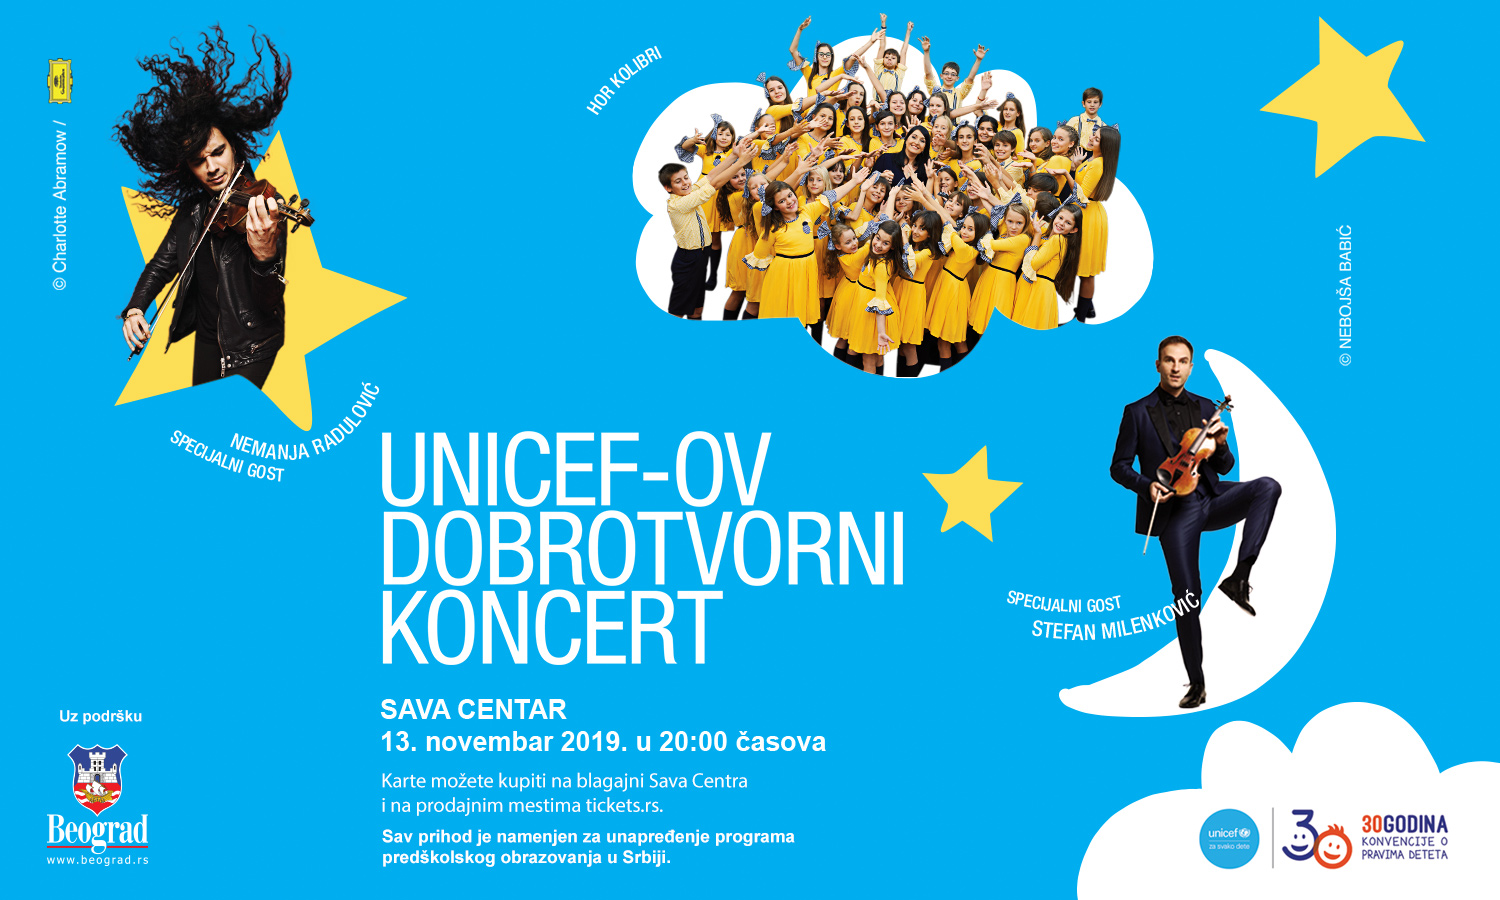 UNICEF CHARITY CONCERT